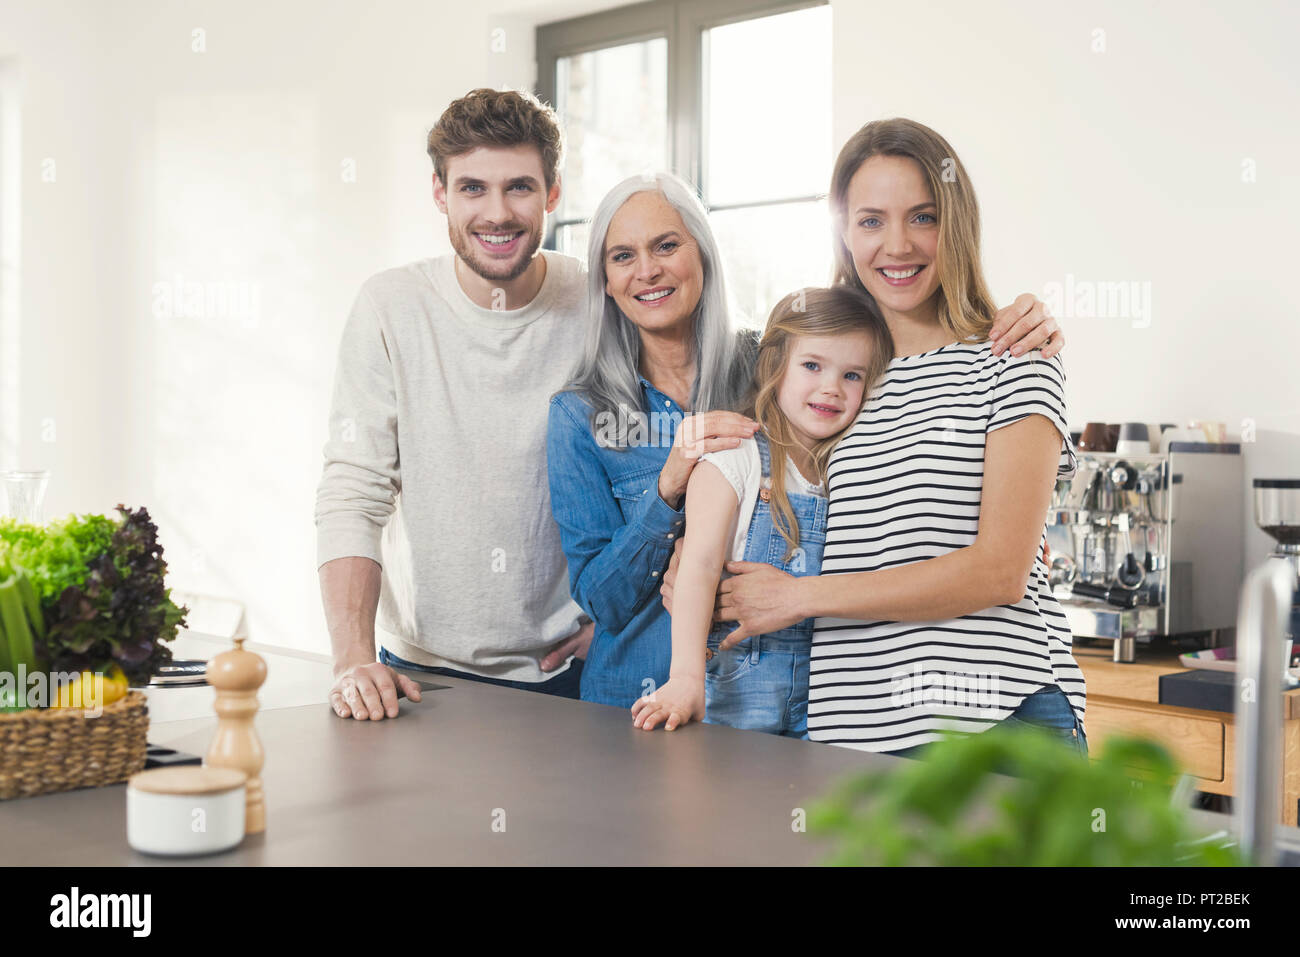 Happy three generations family standing in kitchen Stock Photo